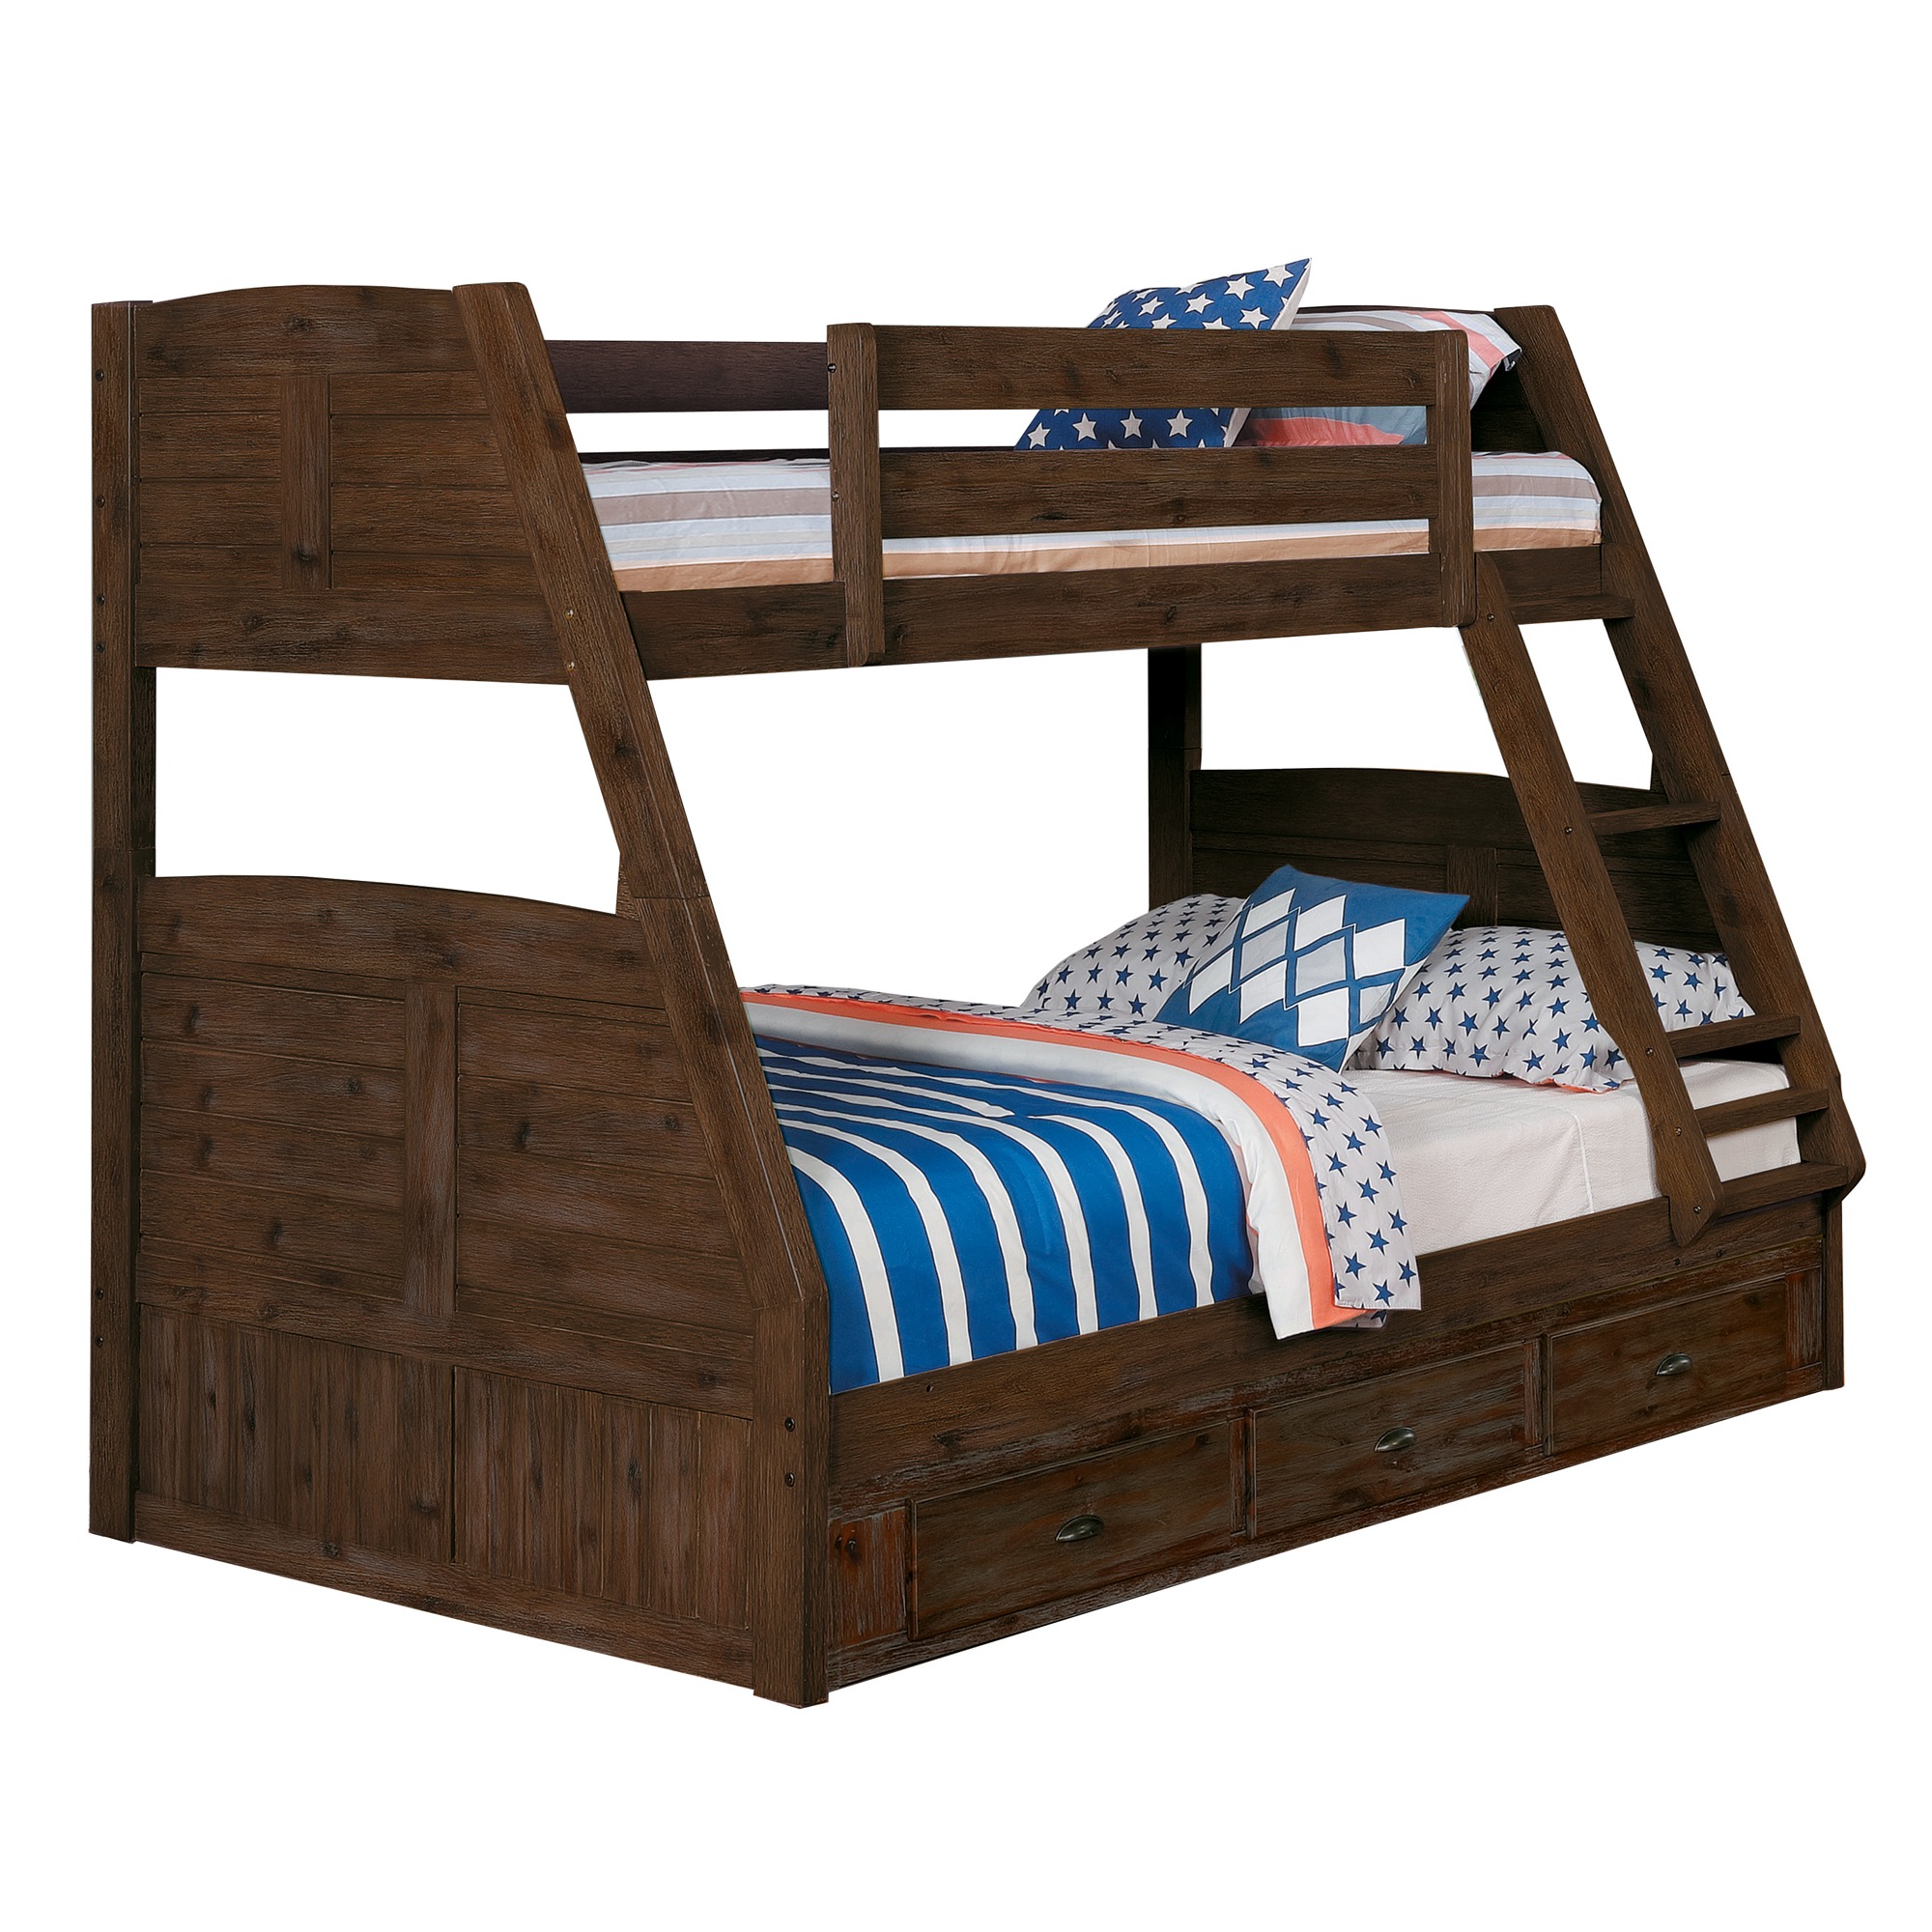 Full Chestnut Hardwood Bunk Bed, Discovery World Twin Over Full Bunk Bed